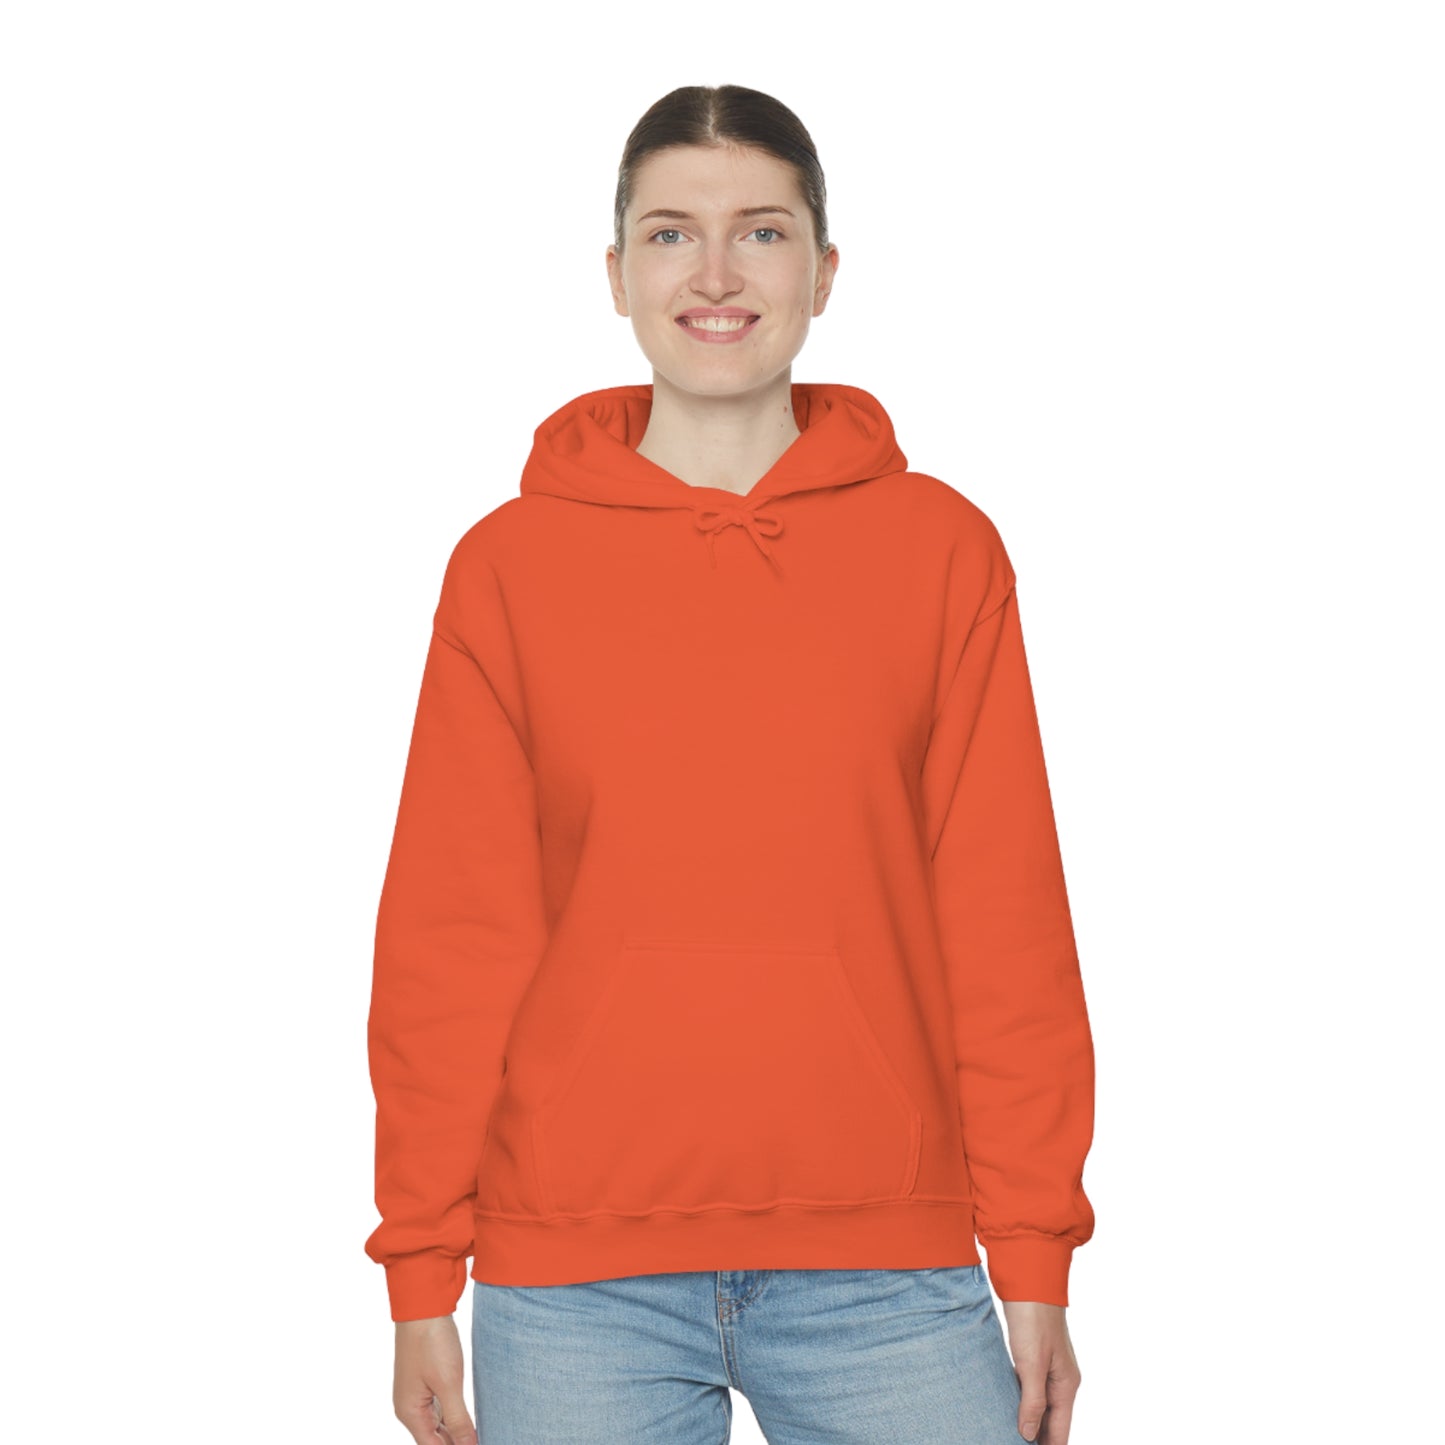 Unisex Heavy Blend™ Hooded Sweatshirt - Country music and beer, thats why I'm here